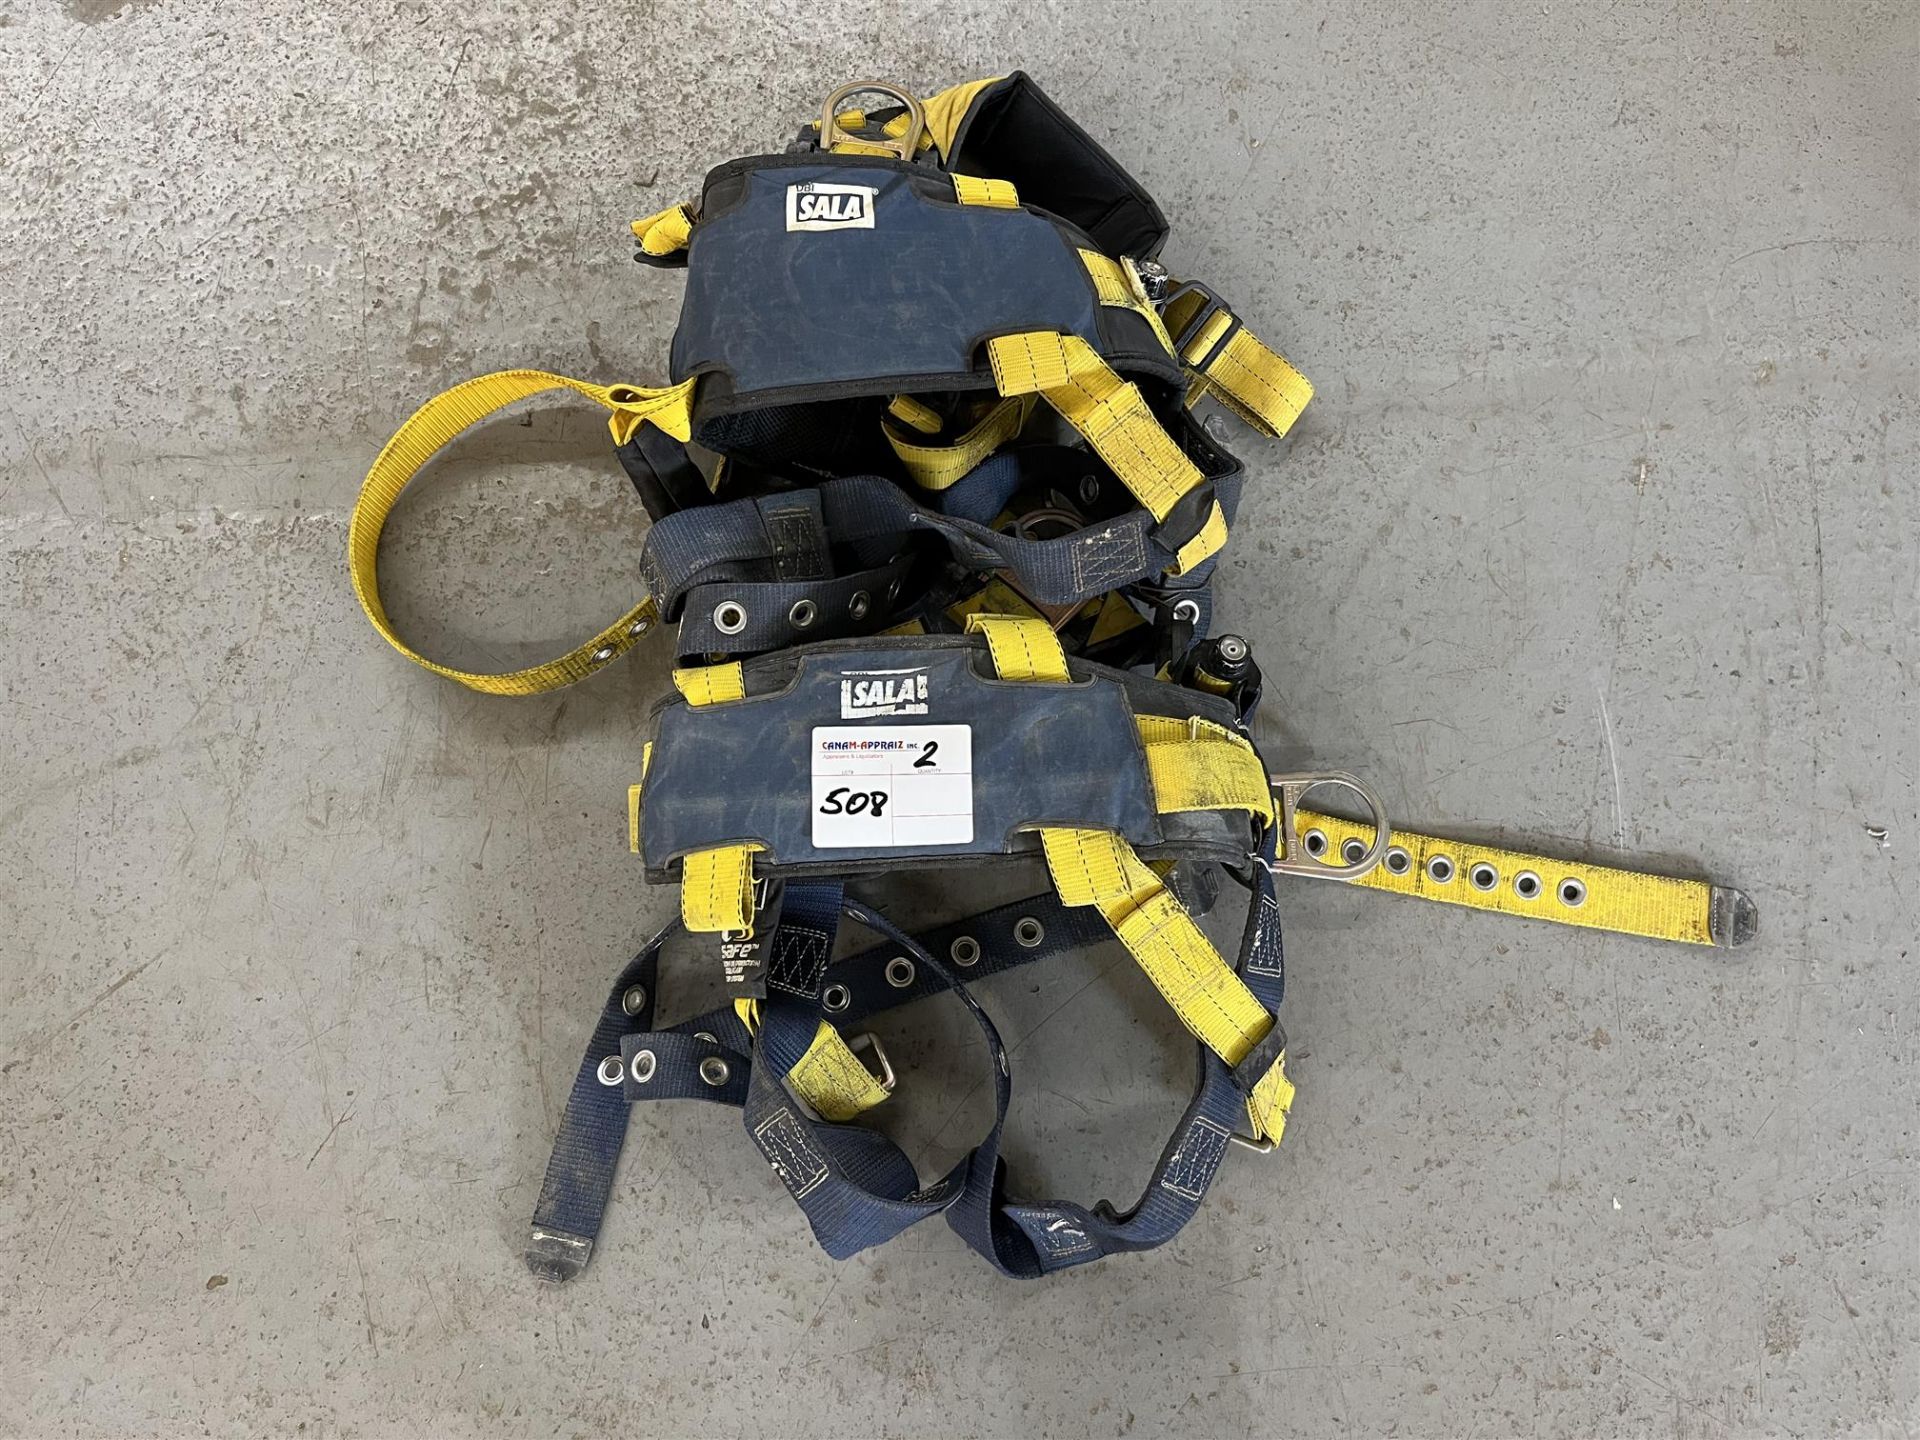 SALA Harness with Attachments - 2 Sets